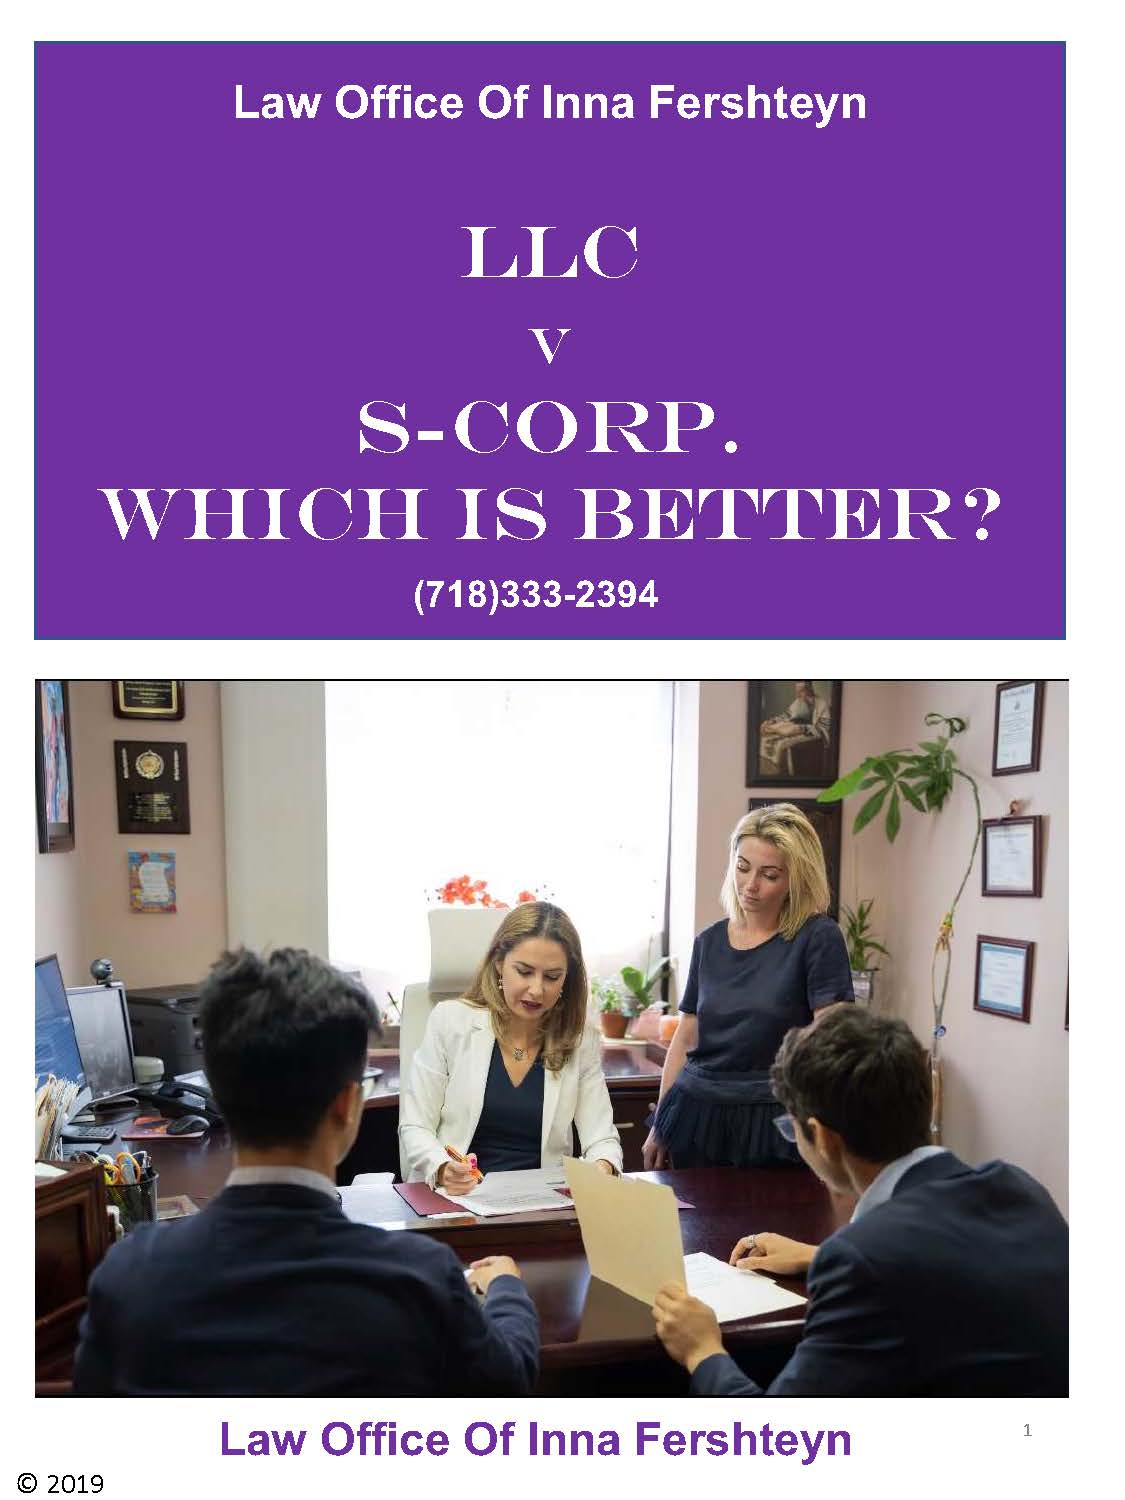 LLC vs S-Corp which is better?